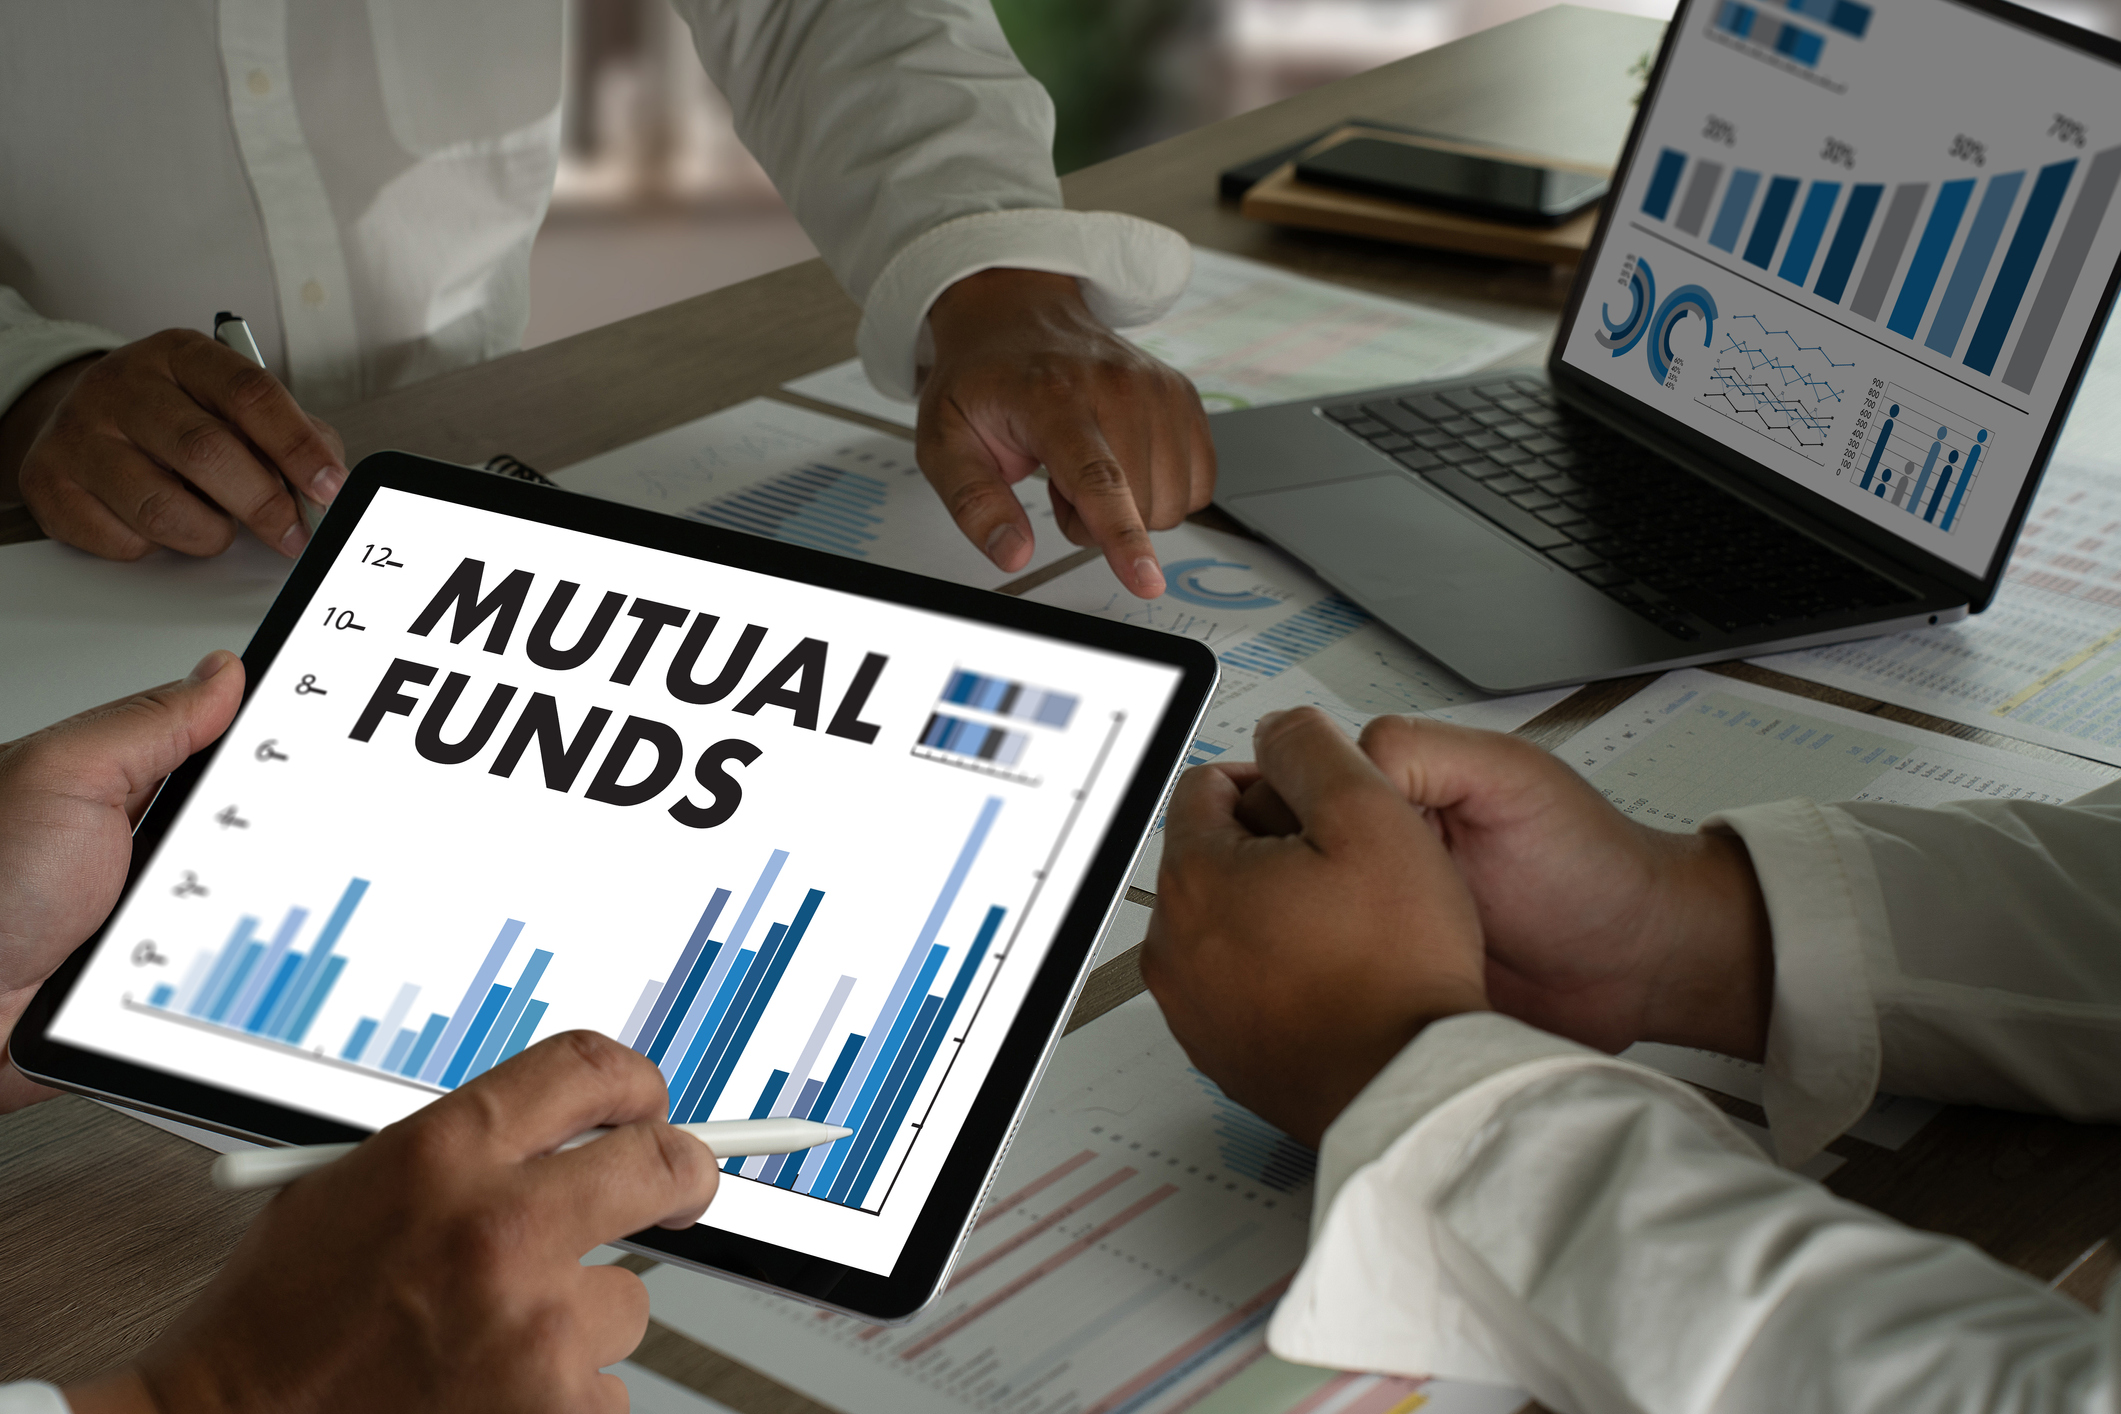 The Mutual Fund in Simple Terms - Tushaus Wealth Management